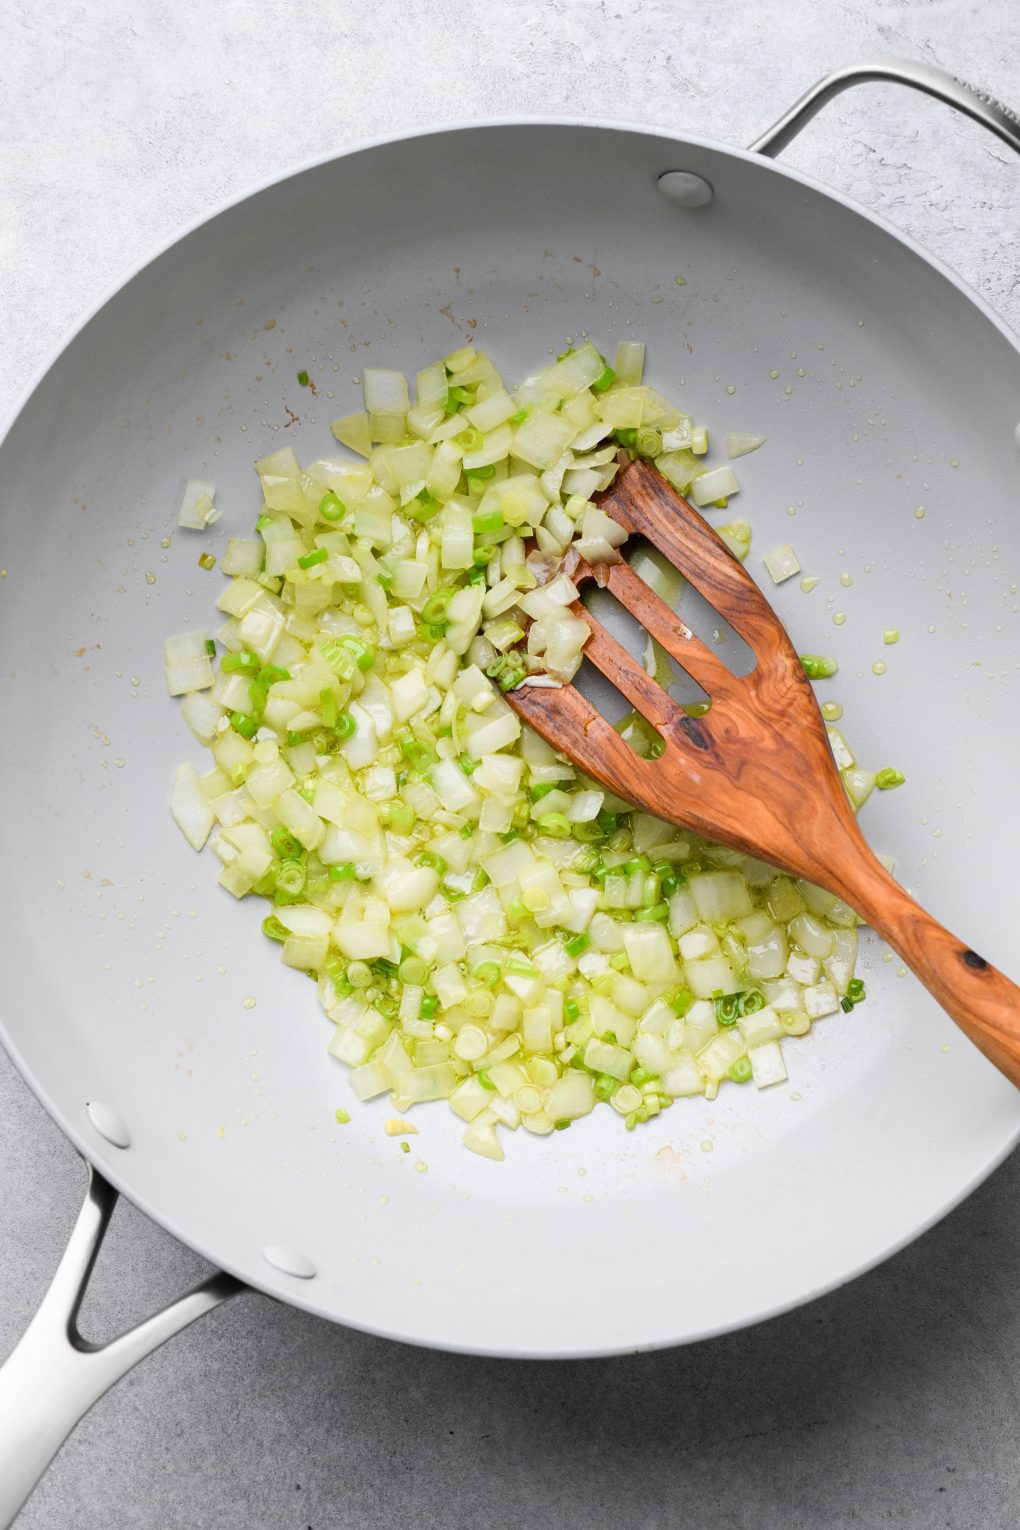 Wok with cooked diced green onions and thinly sliced green onions.